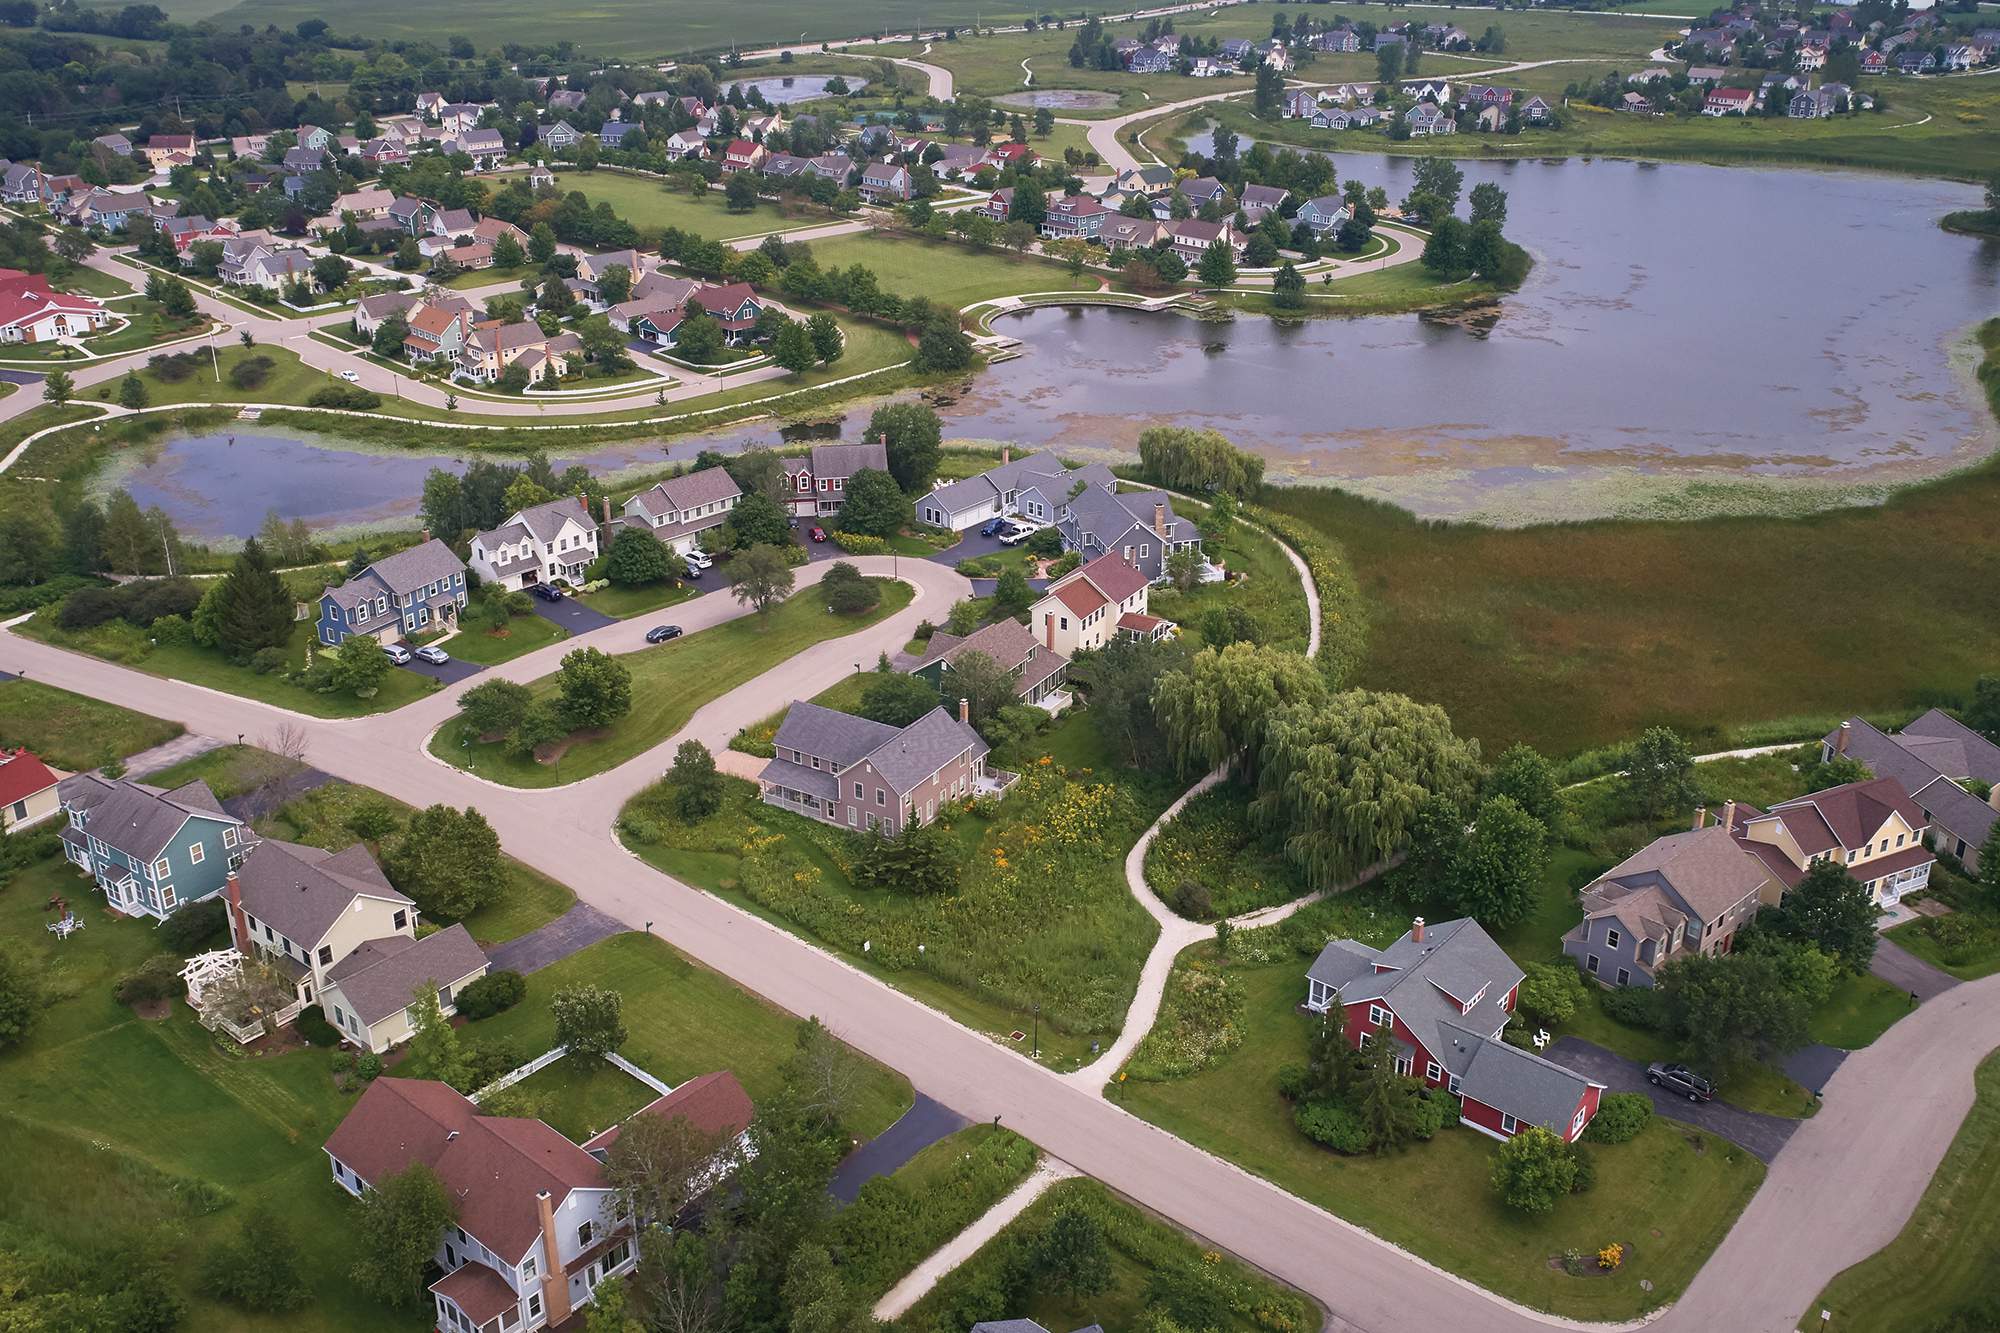 Photo of housing in Lake County.